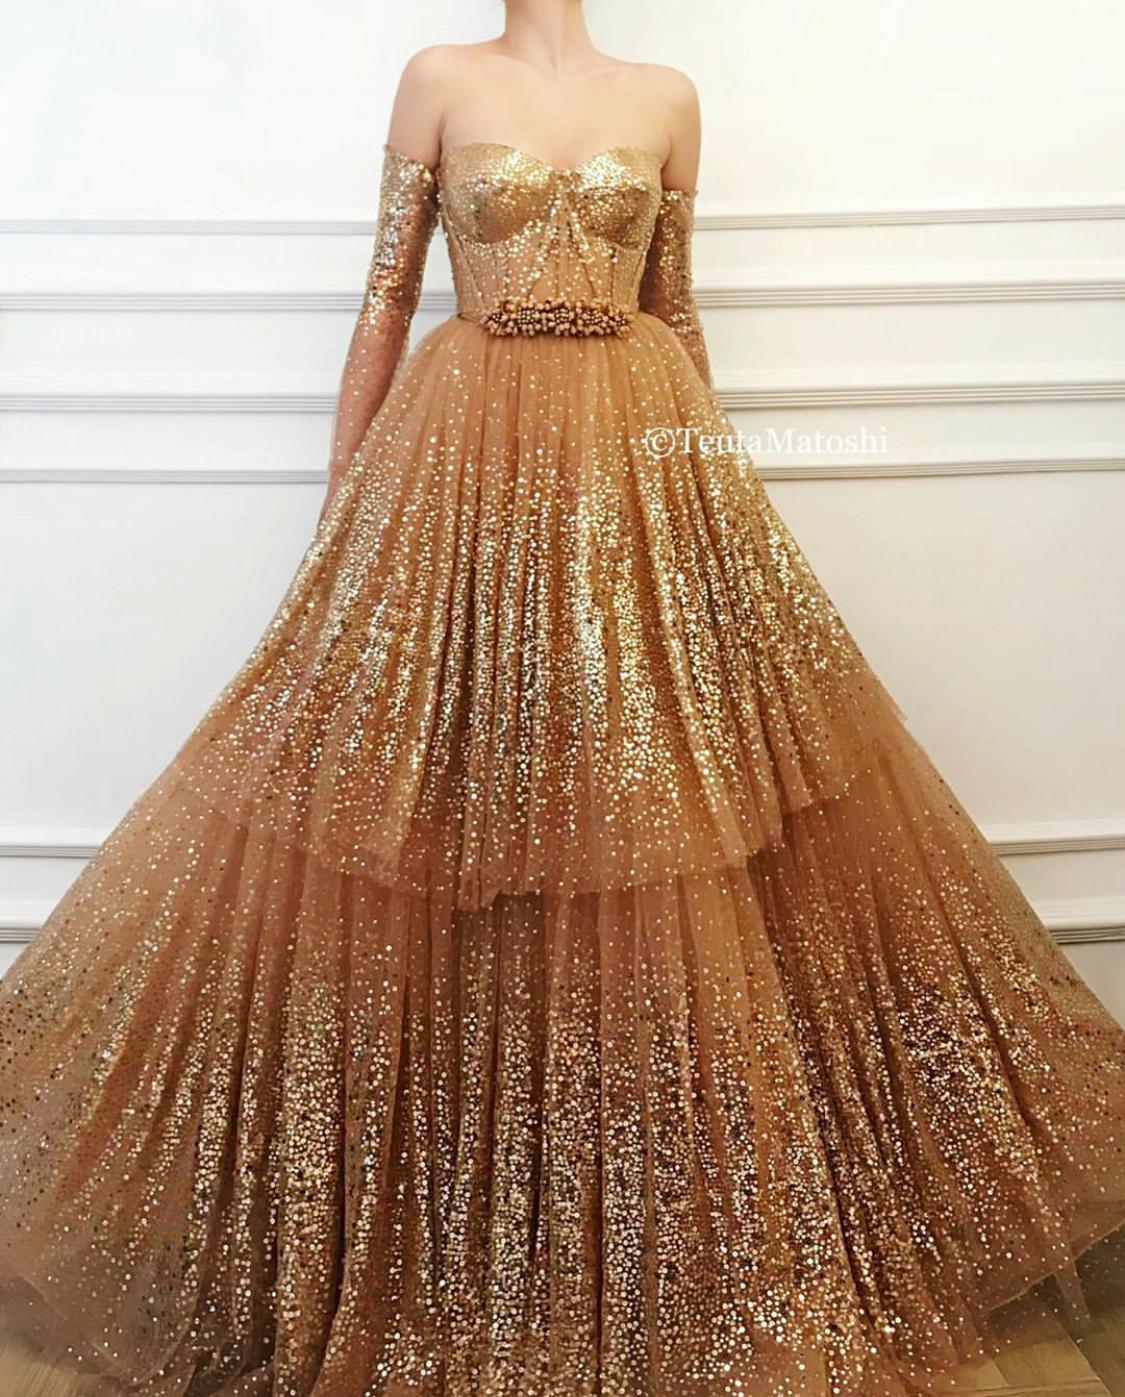 Gold A-Line dress with long off the shoulder sleeves and sequins